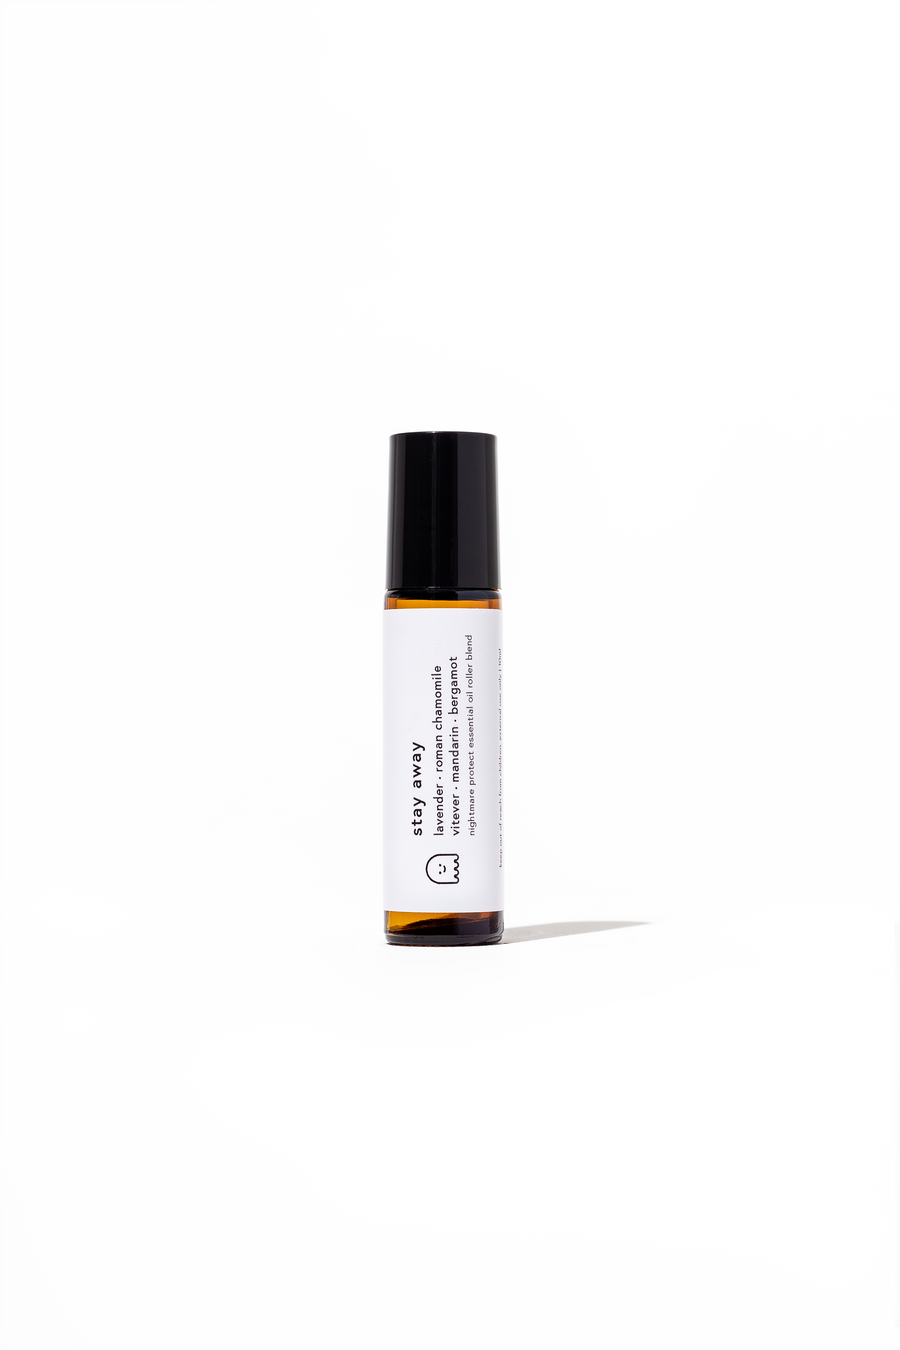 Cleanse & Co. Mum & Kids Blend. Stay Away. Nightmare Protect Essential Oil Roller.